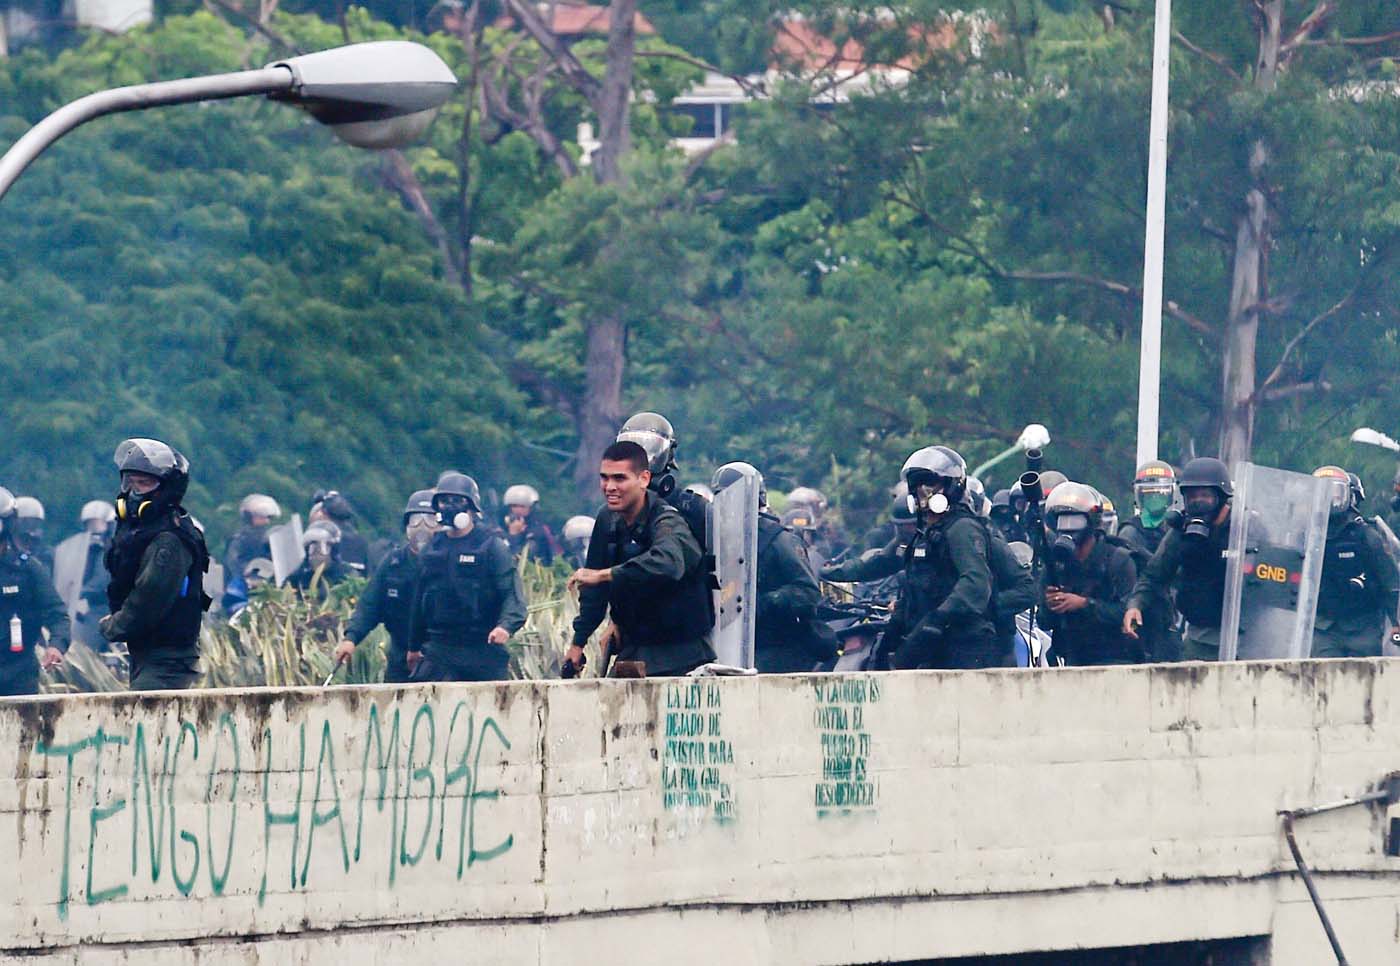 A member of the National Guard holds a gun (C) during clashes with opposition activists demonstrating against the government of President Nicolas Maduro along the Francisco Fajardo highway in Caracas on June 19, 2017. Near-daily protests against President Nicolas Maduro began on April 1, with demonstrators demanding his removal and the holding of new elections. The demonstrations have often turned violent with 73 people killed and more than 1,000 injured so far, prosecutors say, and more than 3,000 arrested, according to the NGO Forum Penal.  / AFP PHOTO / Juan BARRETO